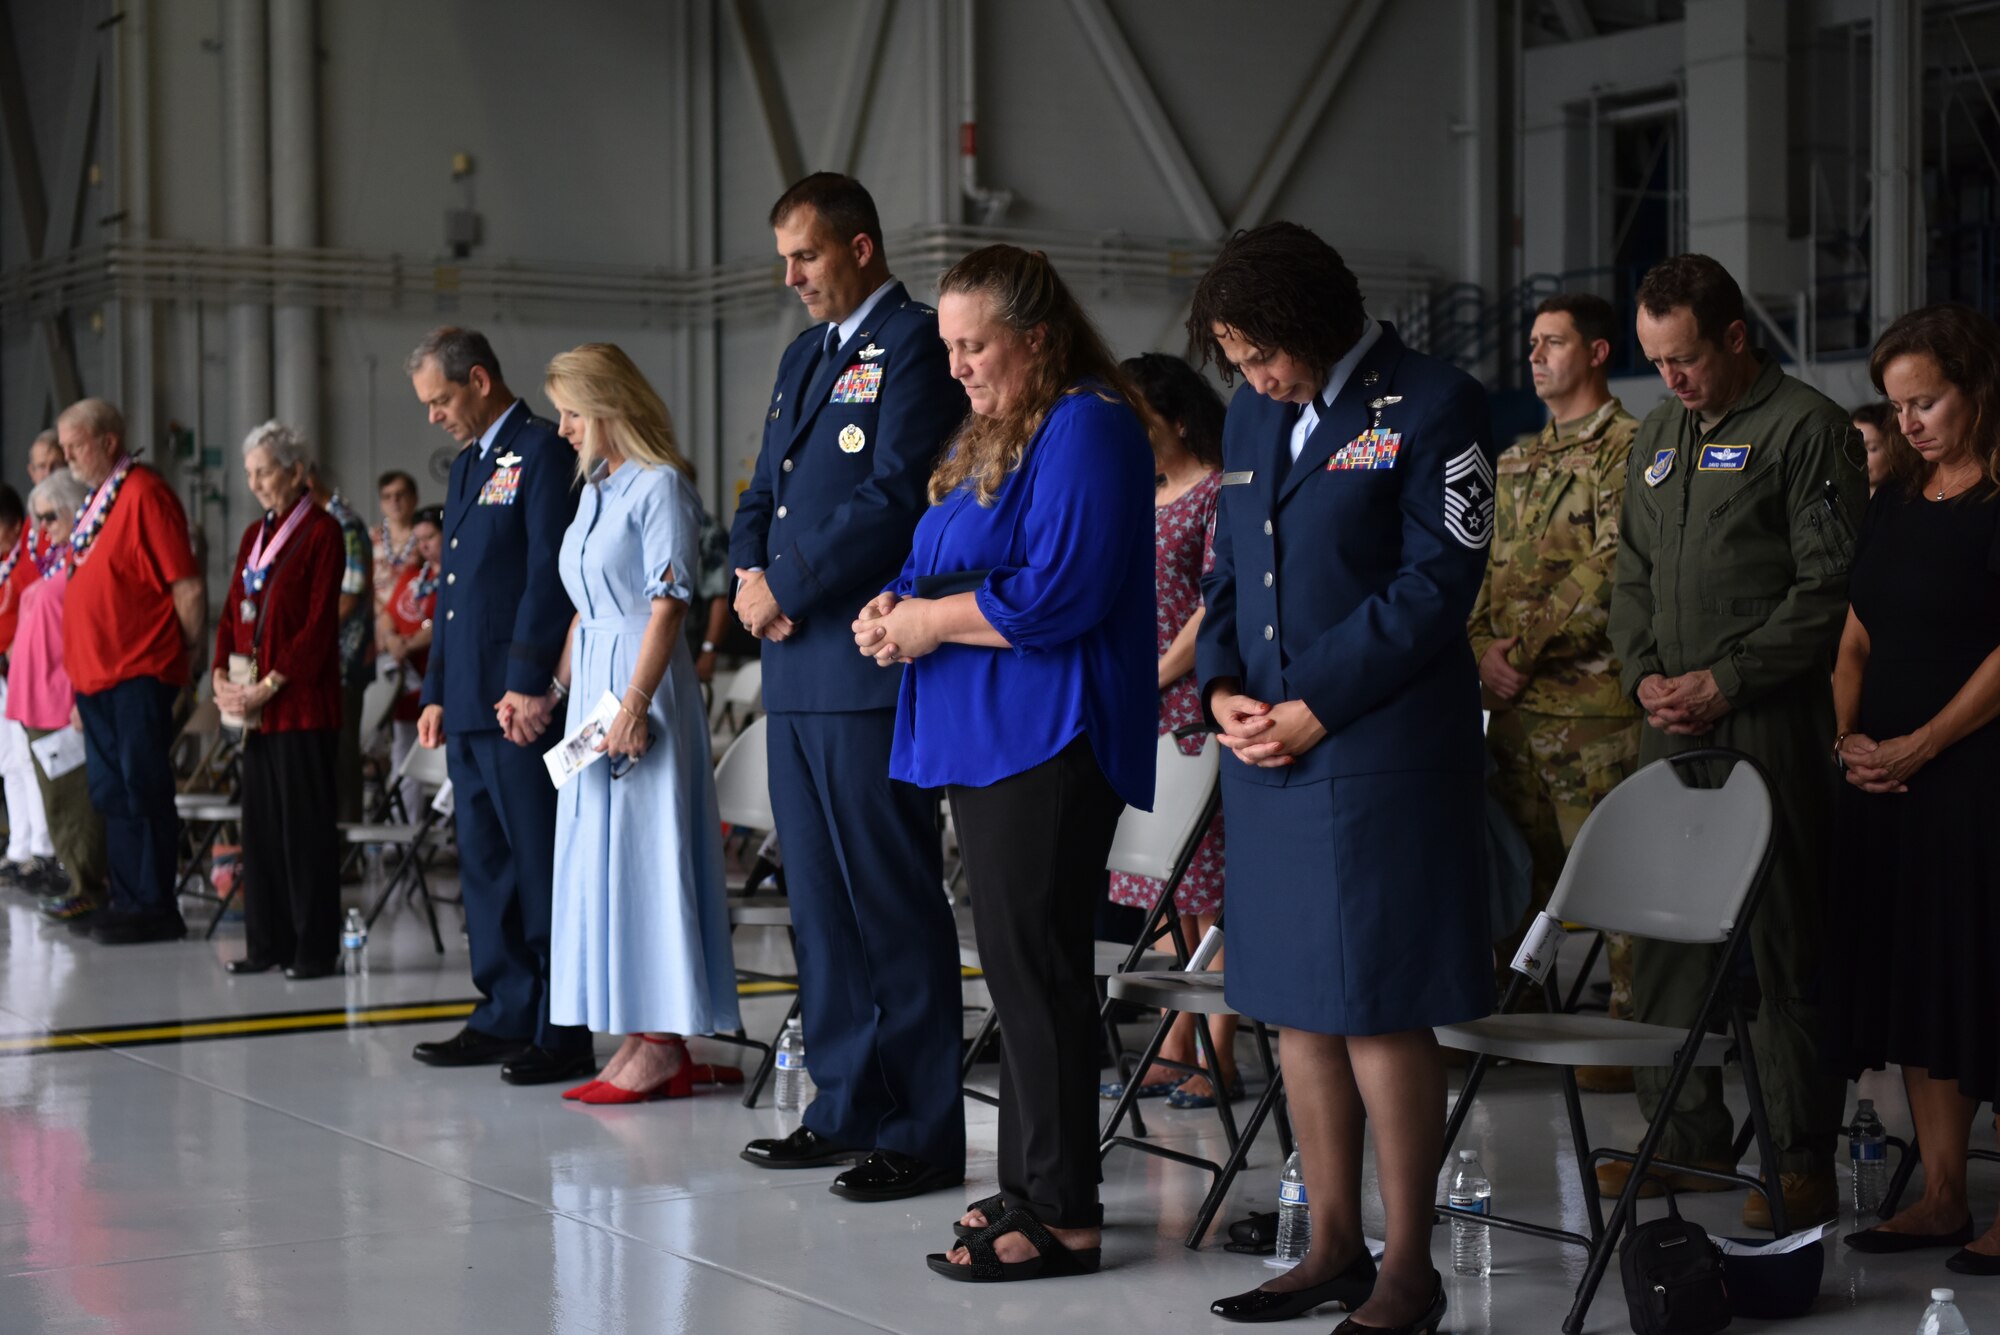 Gen. Ken Wilsbach, PACAF commander, Cindy Wilsbach, First Lady of PACAF, Col. Daniel Dobbels, 15th Wing commander, Lisa Dobbels, spouse, and Chief Master Sgt. Sheronne King, 15 WG command chief, bow their heads during the invocation during the December 7th Remembrance Ceremony at Joint Base Pearl Harbor-Hickam, Hawaii, Dec. 7, 2021. Service members from past and present came together to remember the 80th anniversary of the attacks on Pearl Harbor and Hickam Field that claimed the lives of 189 service members, wounded 303 others, and rendered nearly all aircraft stationed on Hickam useless as the result of the attacks. (U.S. Air Force photo by 1st Lt. Benjamin Aronson)